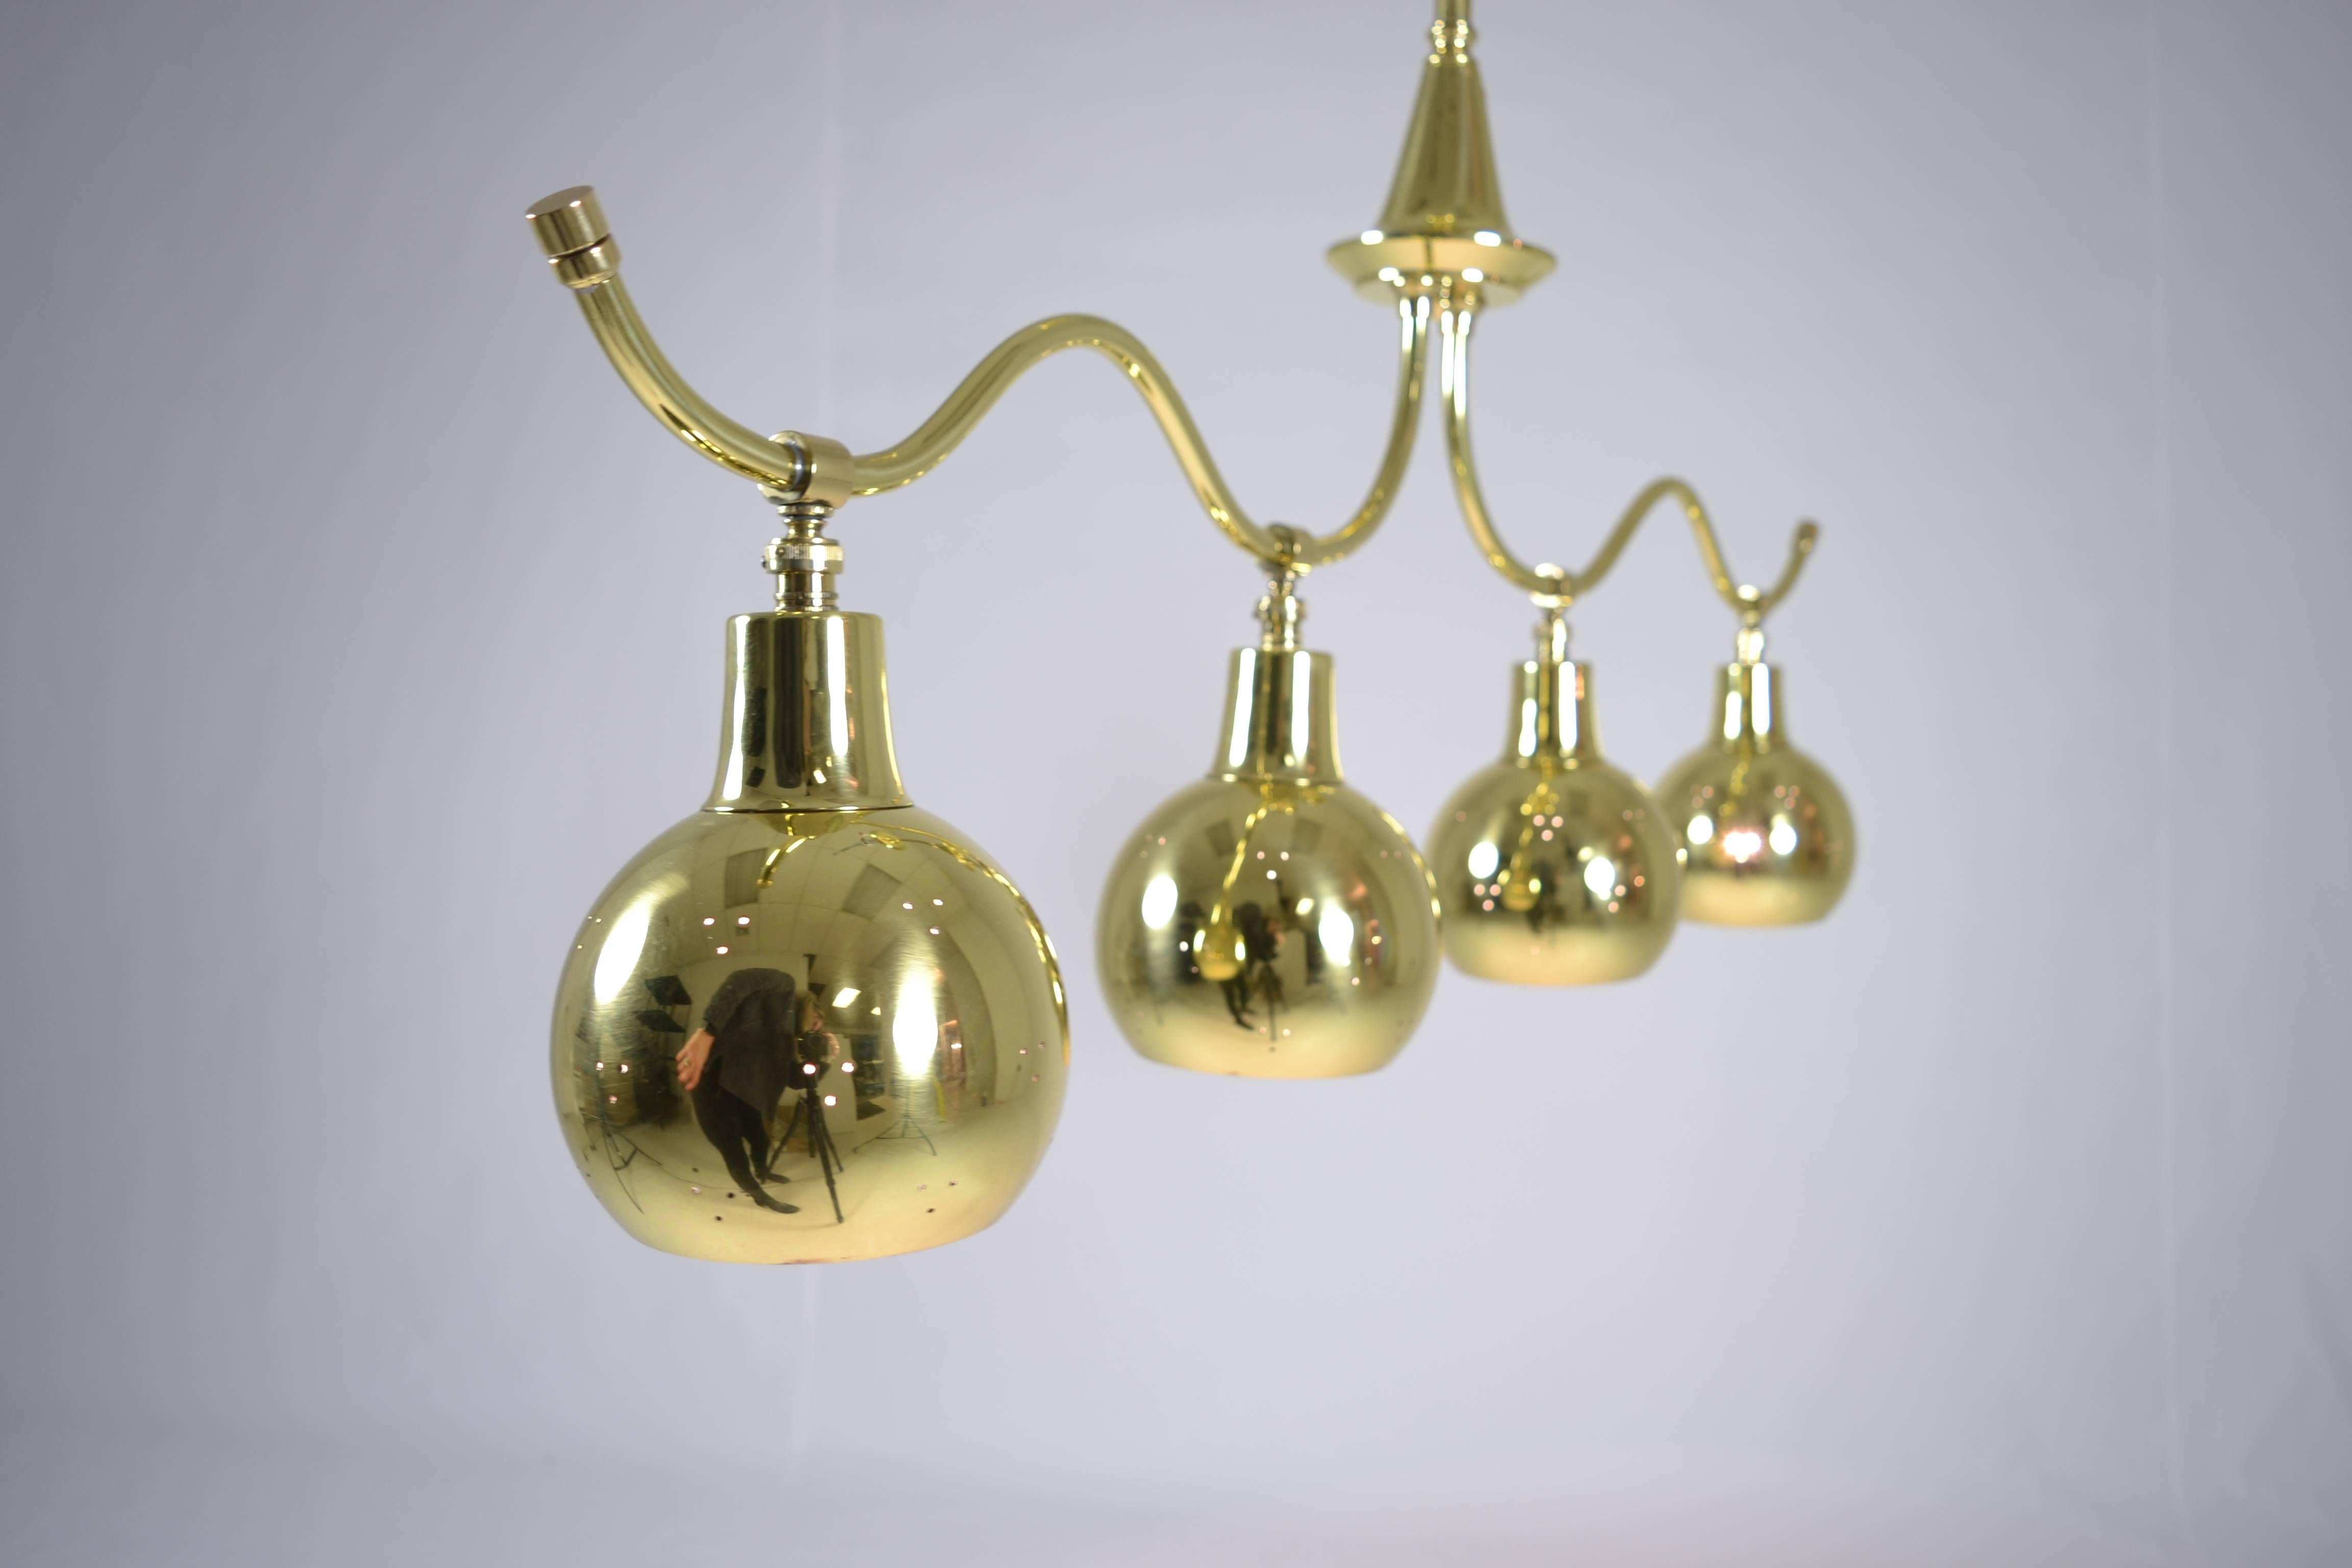 Great form in a quality fixture featuring four brass lamps, each with a swivel fitting allowing light to be directed. Each shade is pierced with pin prick decoration. Newly wired, polished and lacquered.